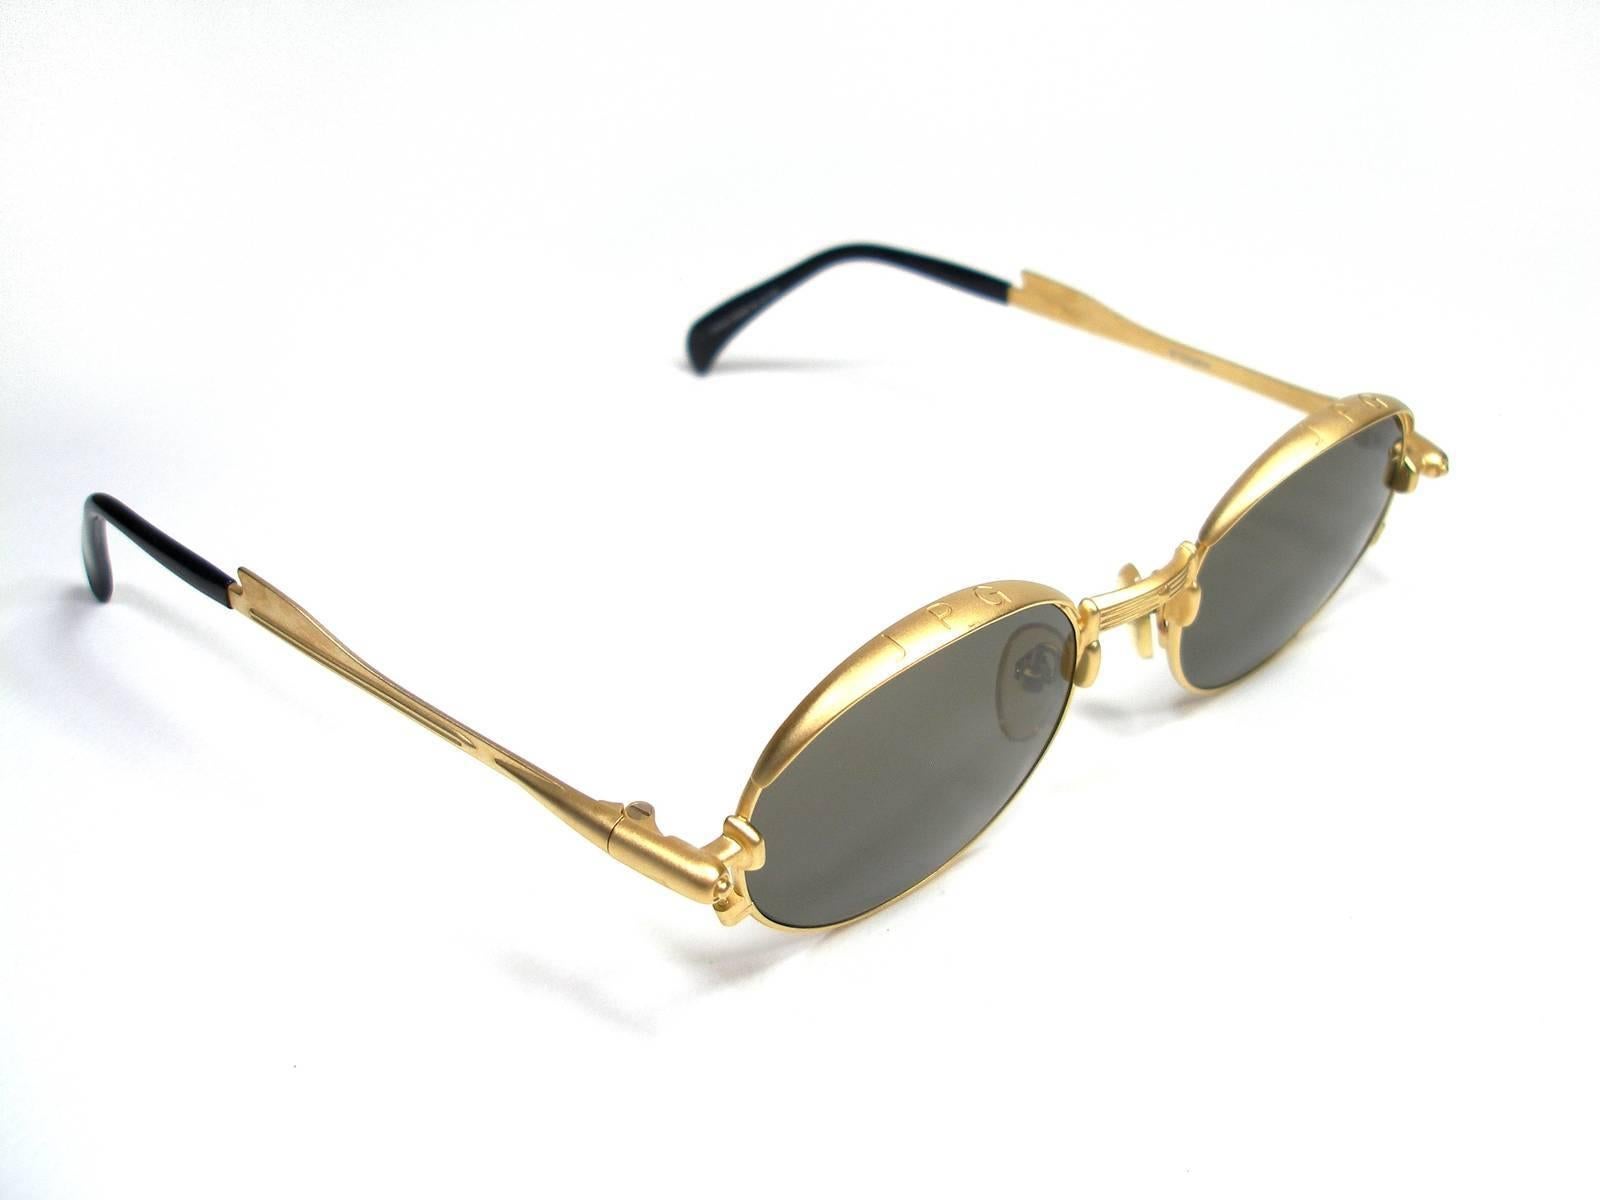 COLLECTIBLE ITEM ! 
Jean Paul Gaultier by Murai
Made in Japan
Circa 1990s
Model : 56-4175
Frame métal Gold 
Lens : Original JPG Lenes-Organic CR39
its comes with JPG case
Please look at the picture for measurements
Please note for this vintage item